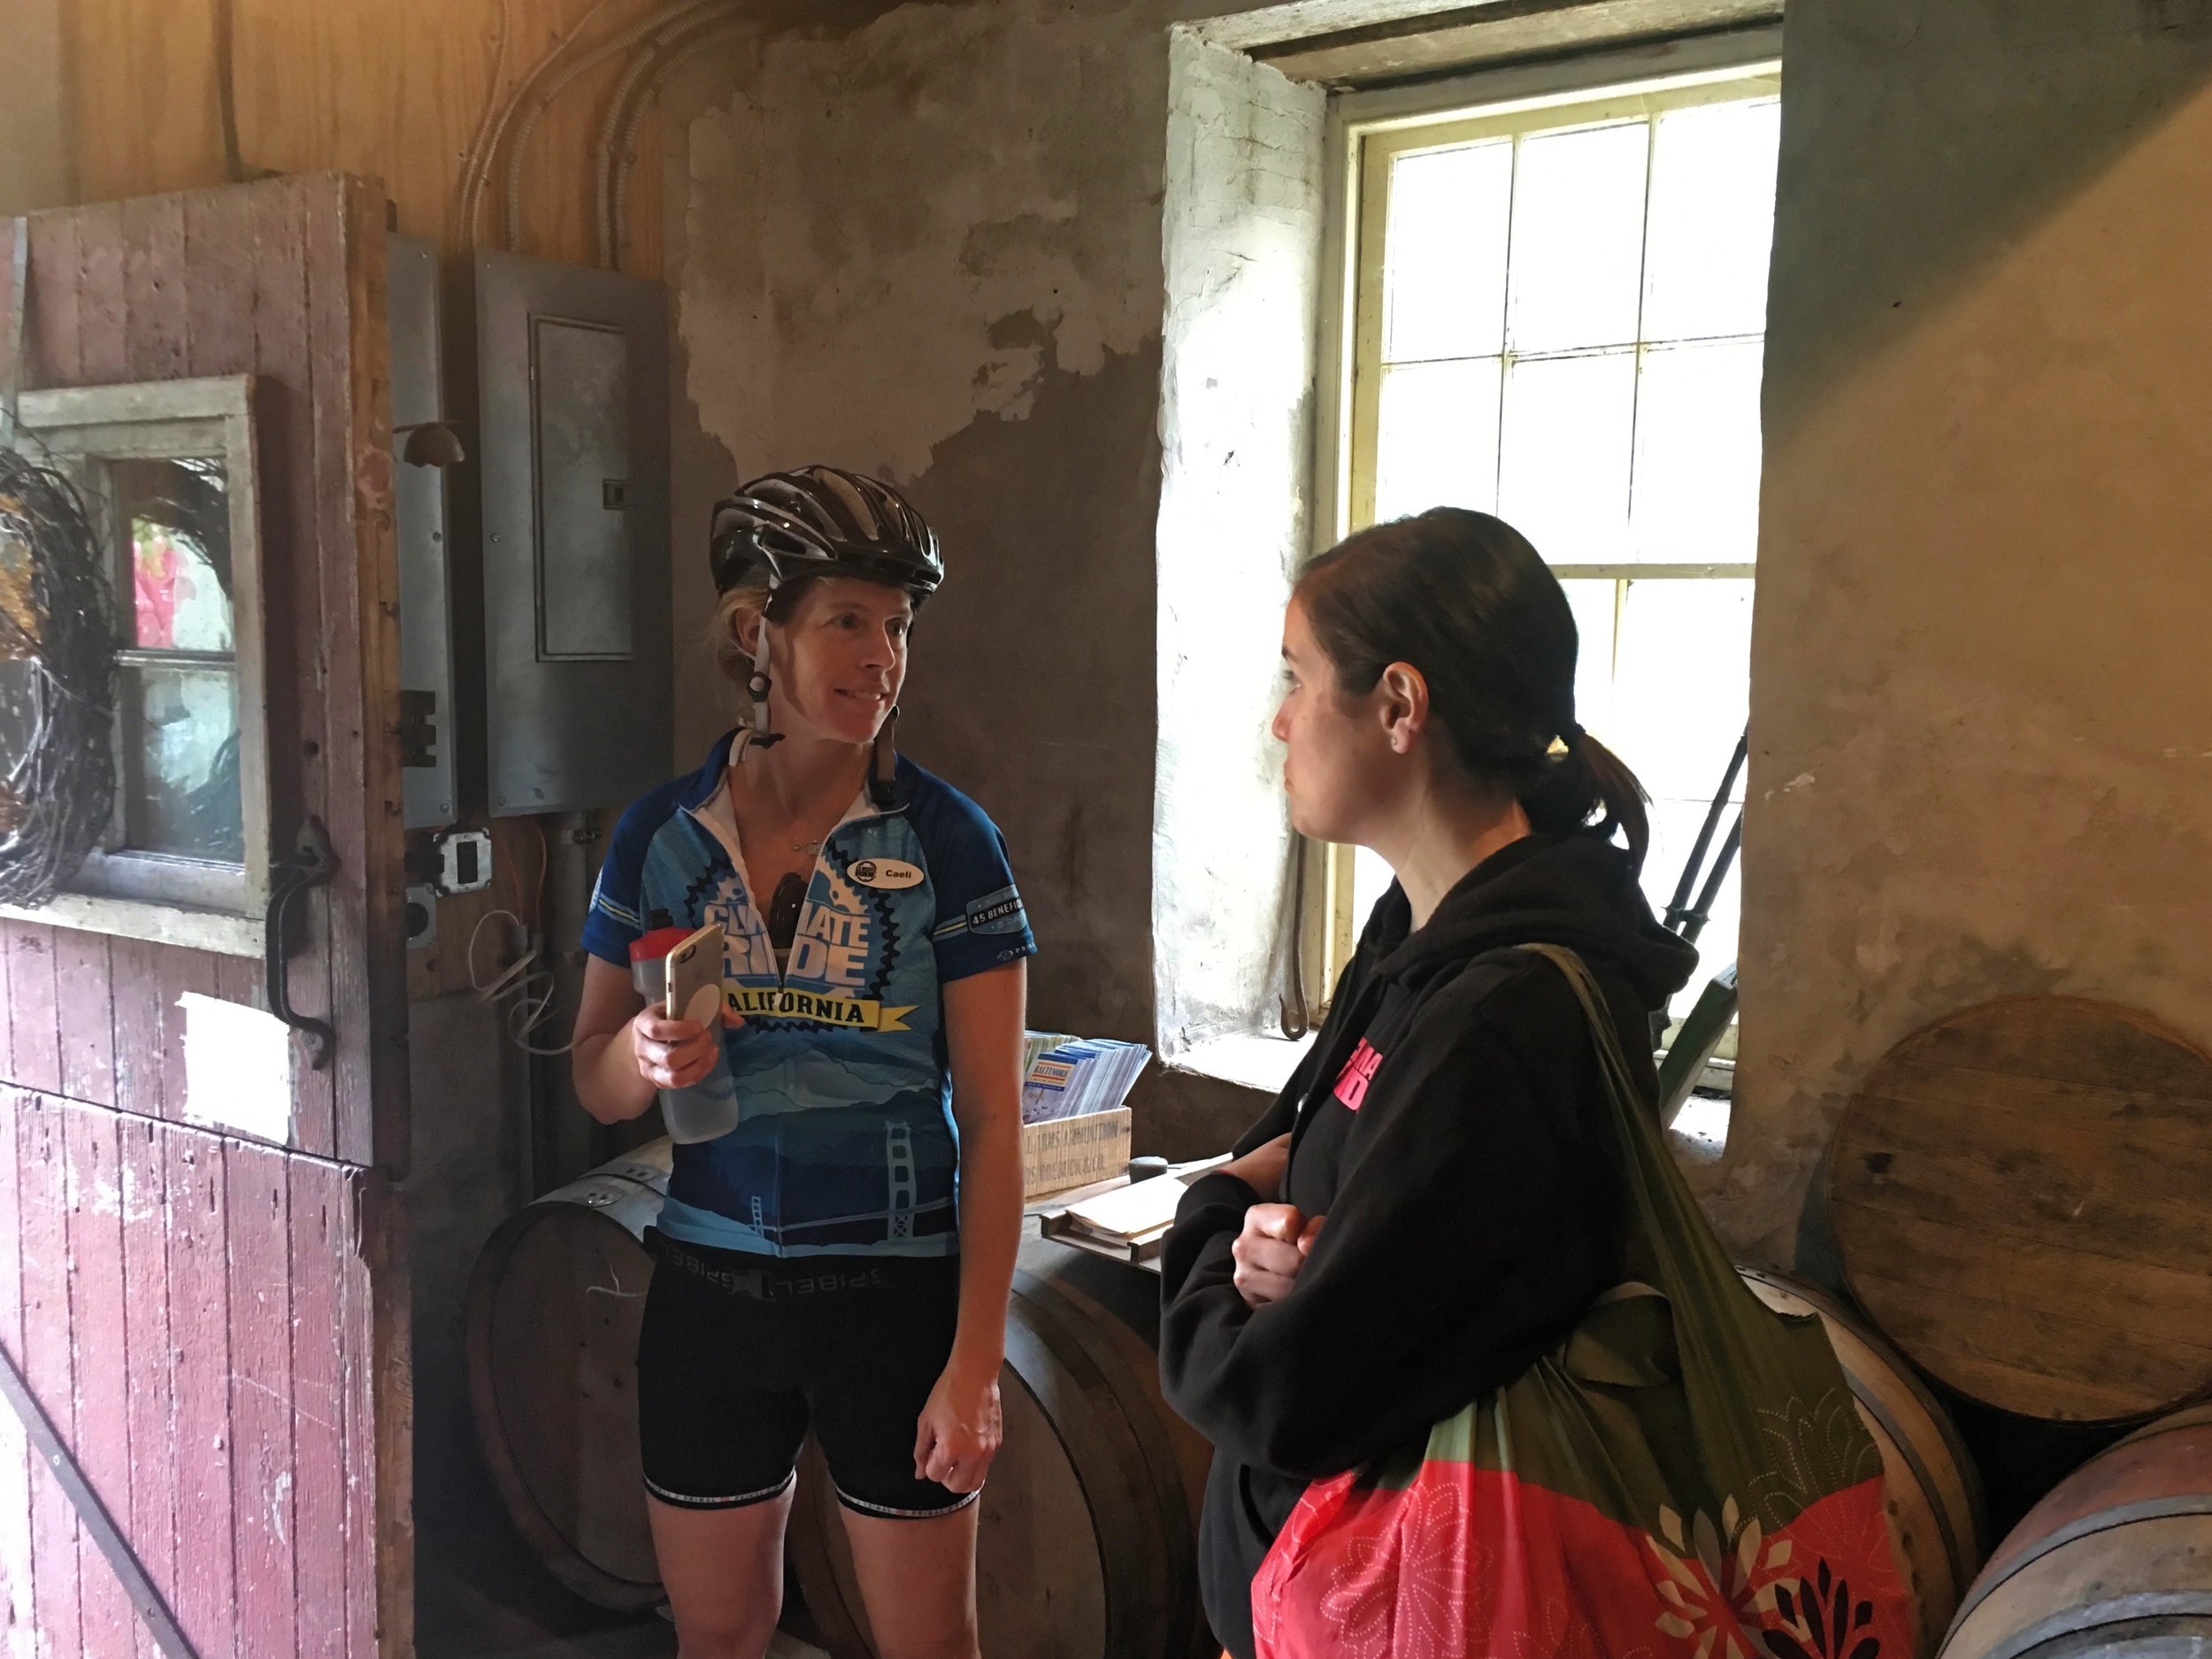 Caeli from Climate Ride talking to a rider